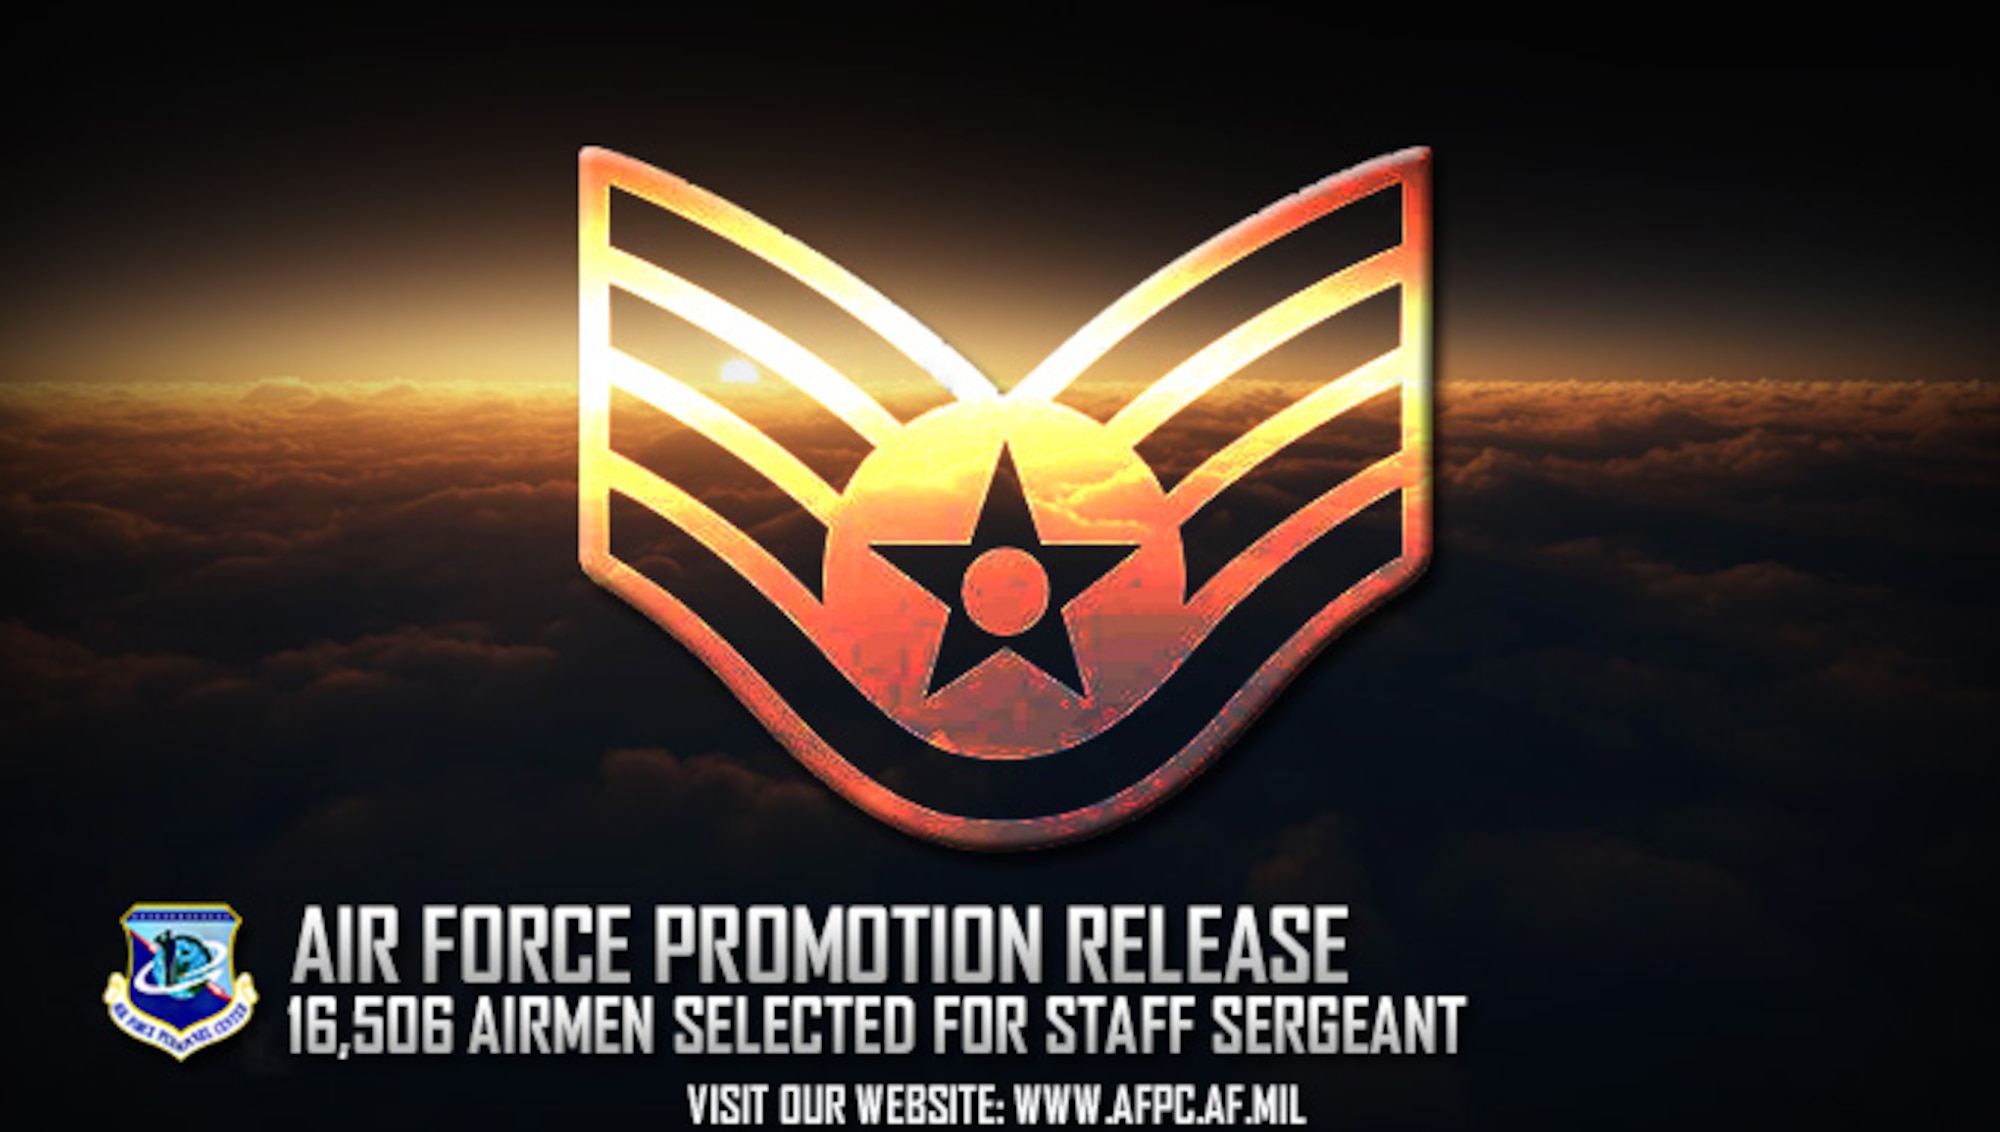 Air Force selects 16,506 for promotion to staff sergeant > Air